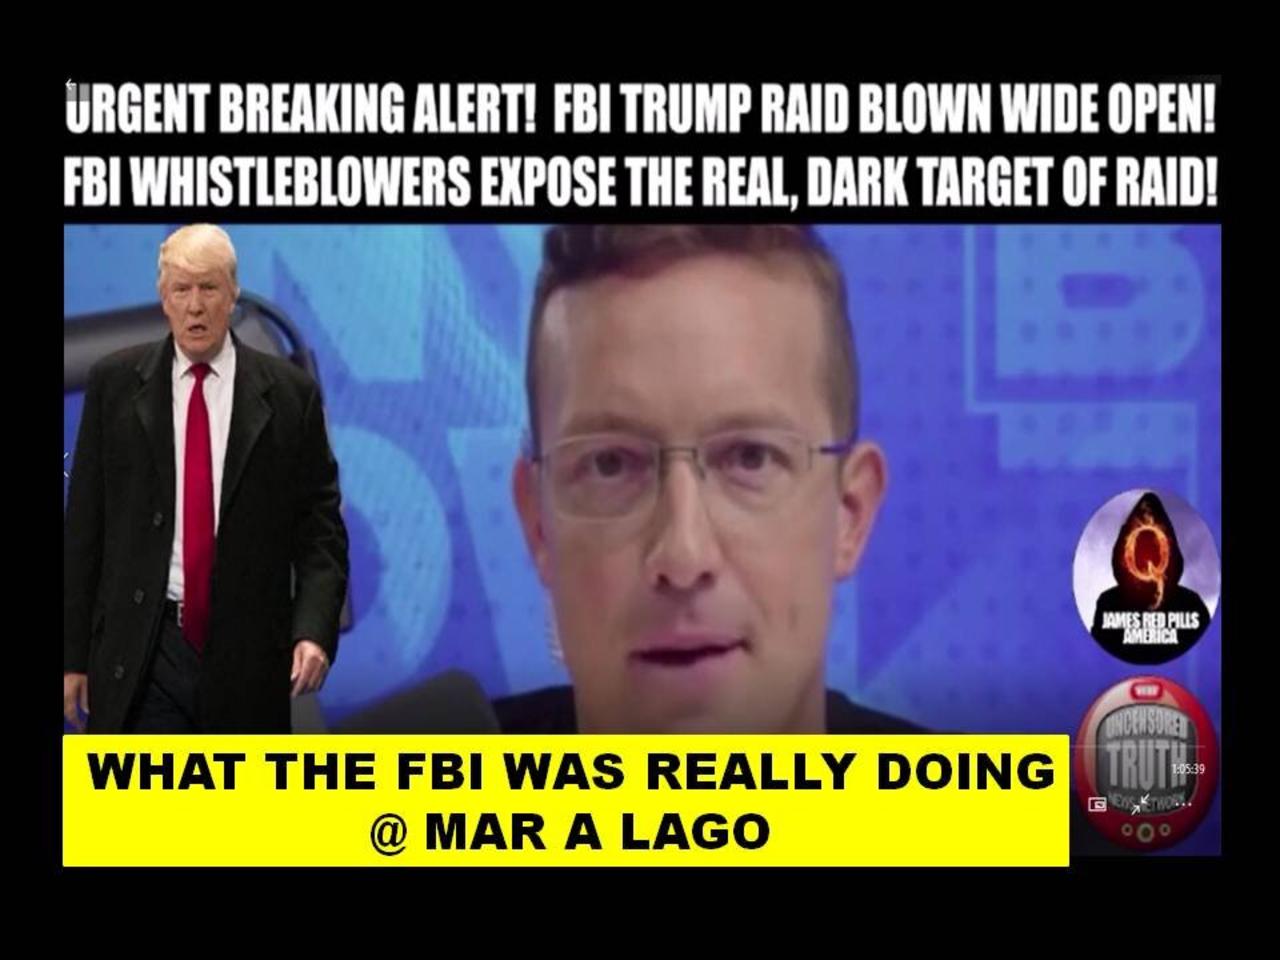 THE FBI RAID ON MAR A LAGO; THE REST OF THE STORY